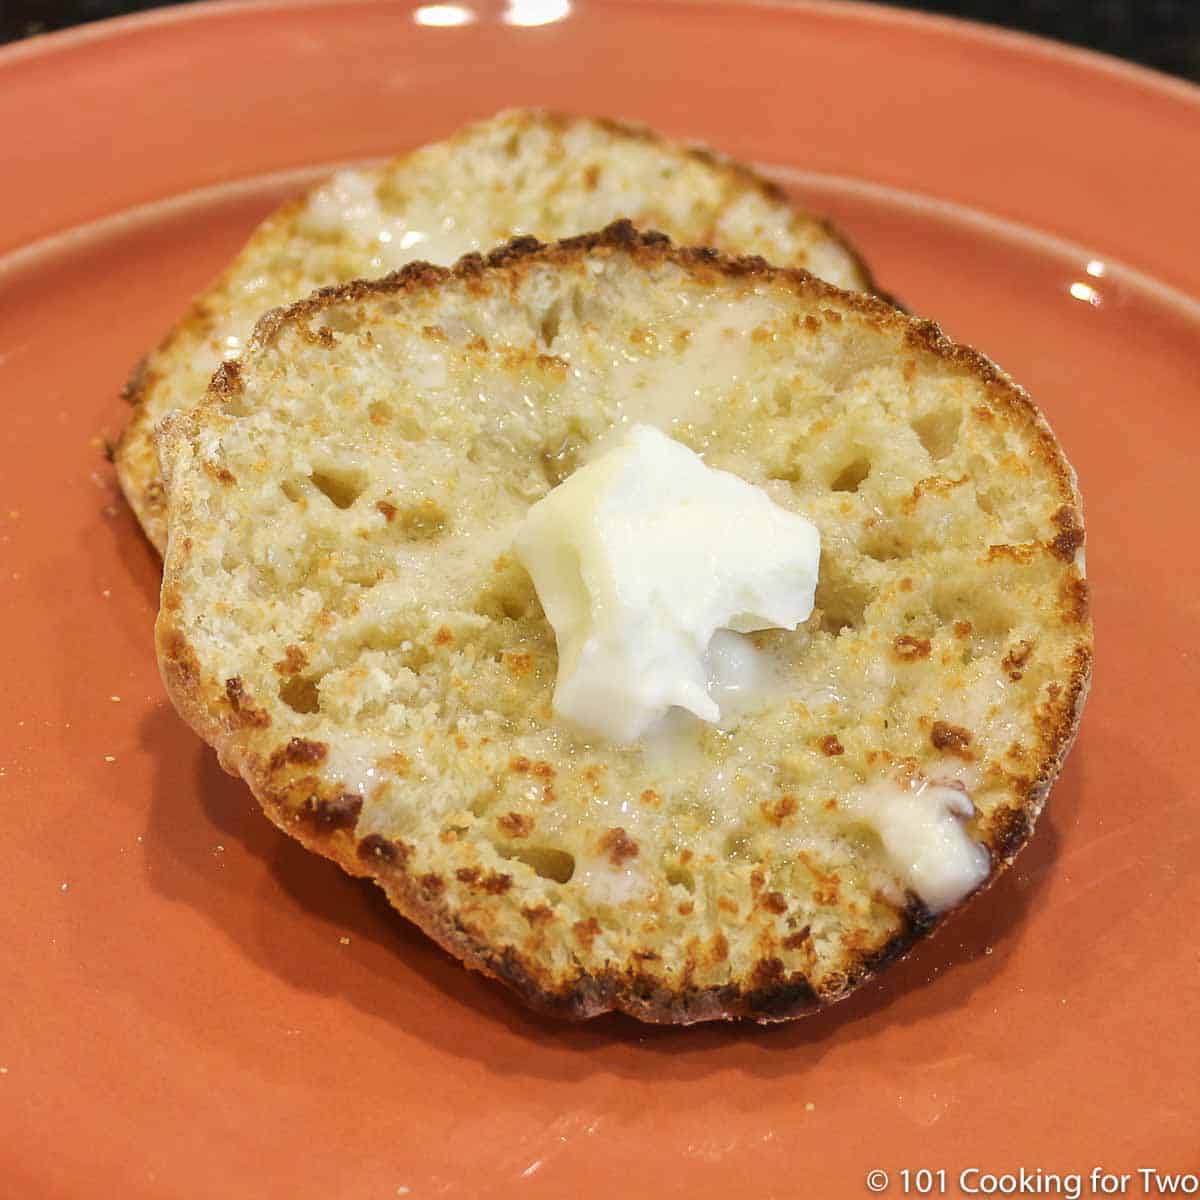 English Muffin on orange plate with butter.